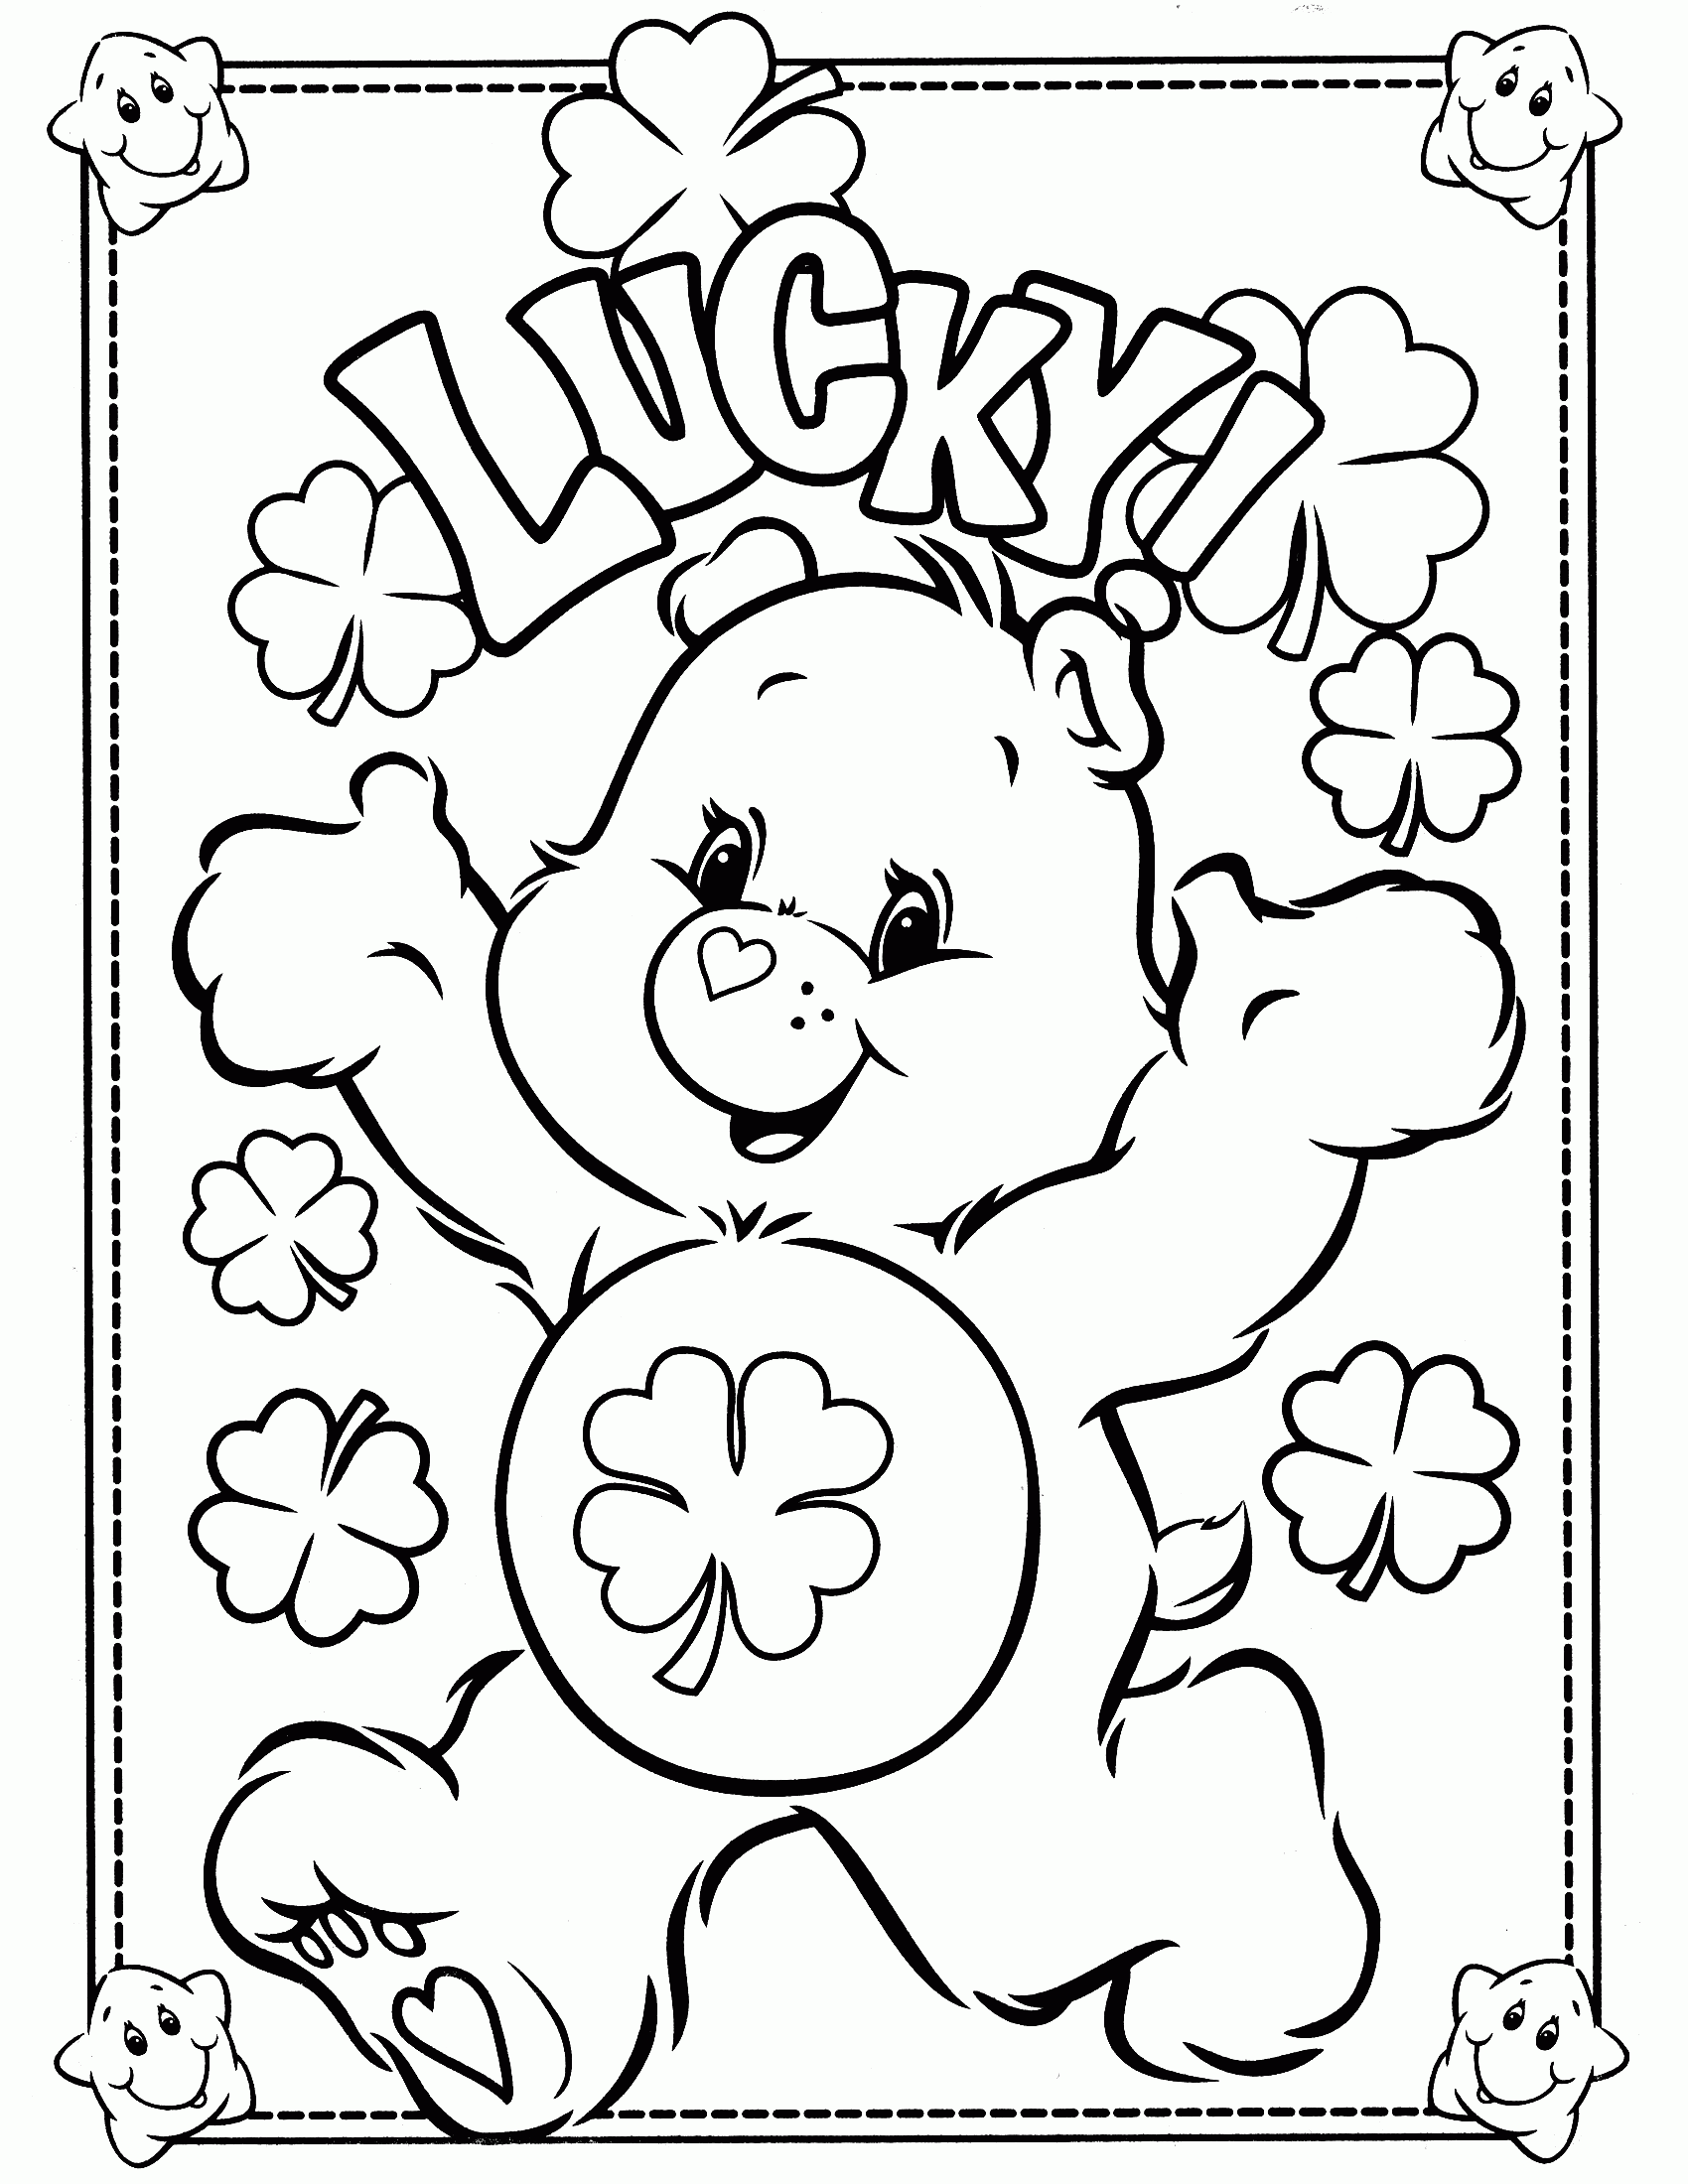 Good Luck bear throwing hands in the air coloring page